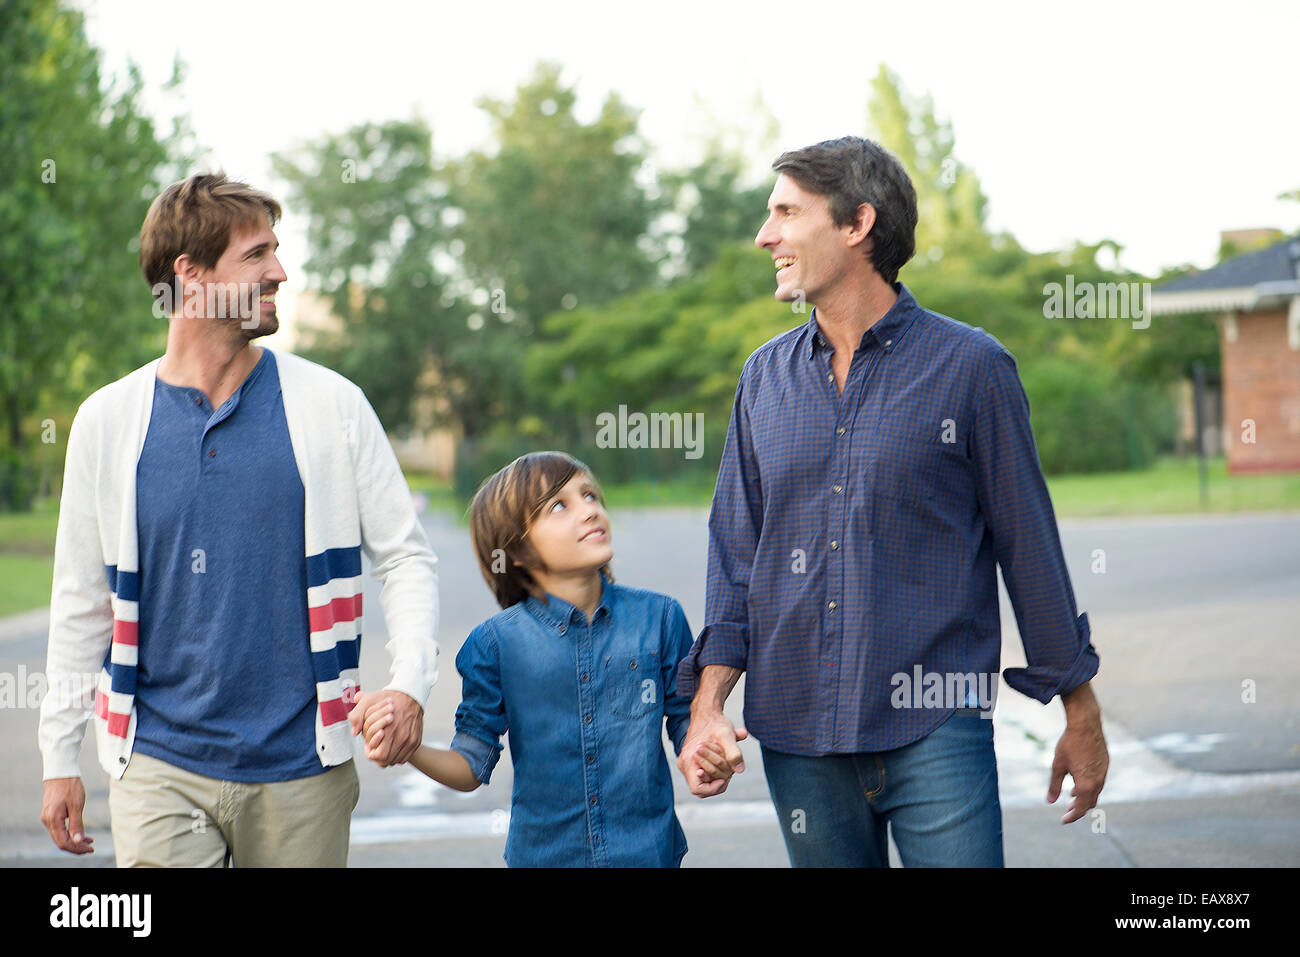 Fathers holding hands with son outdoors Stock Photo